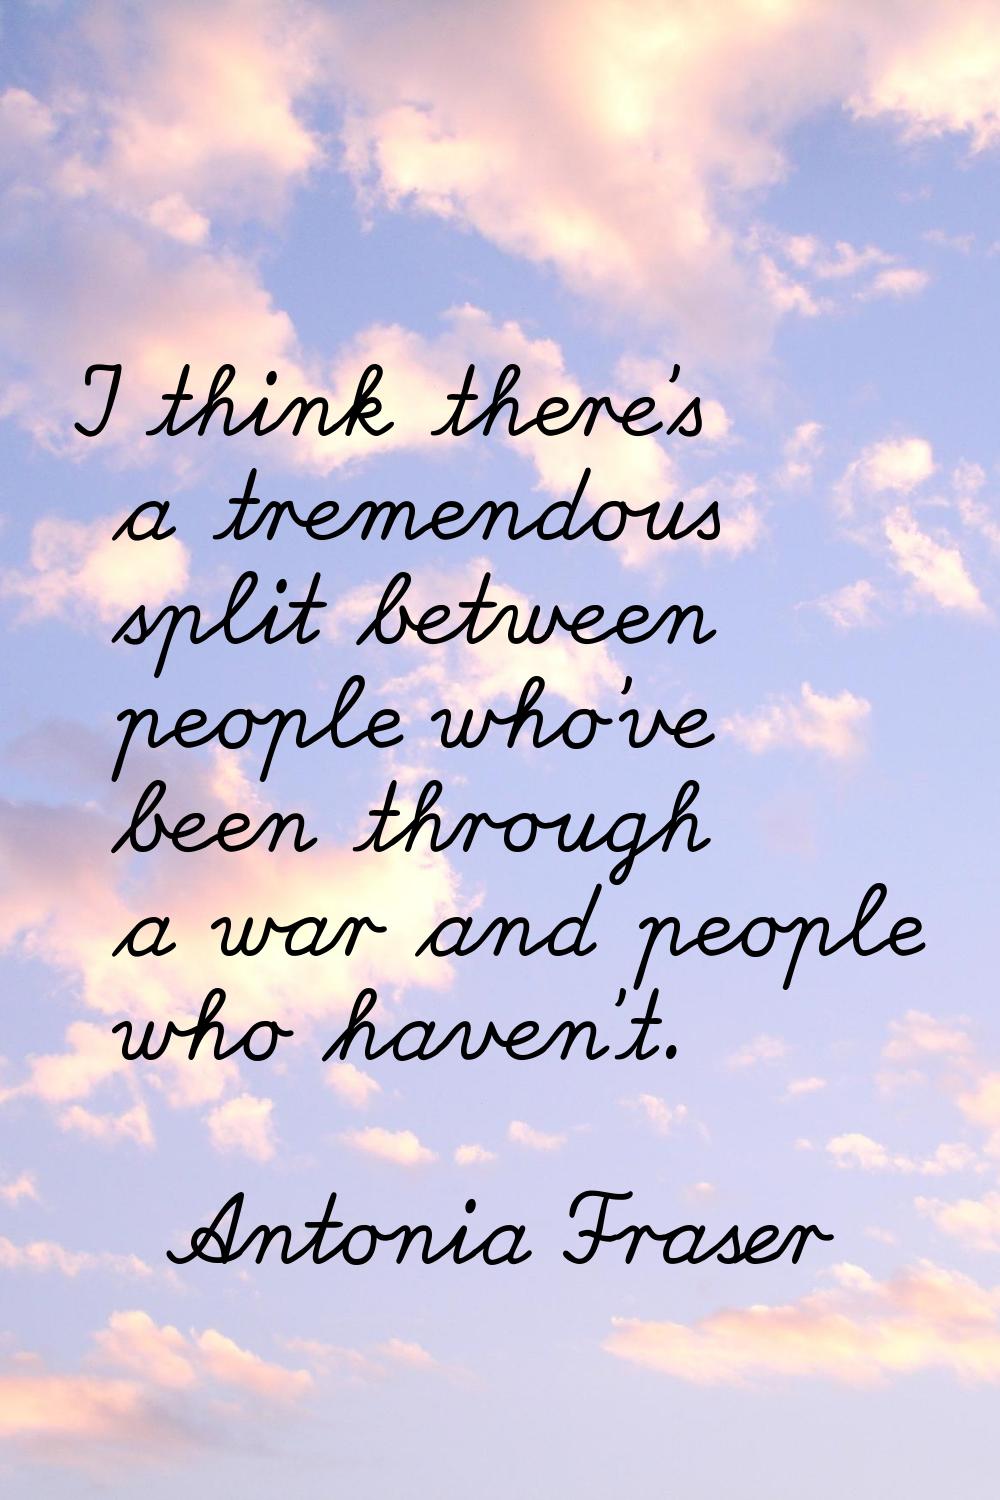 I think there's a tremendous split between people who've been through a war and people who haven't.